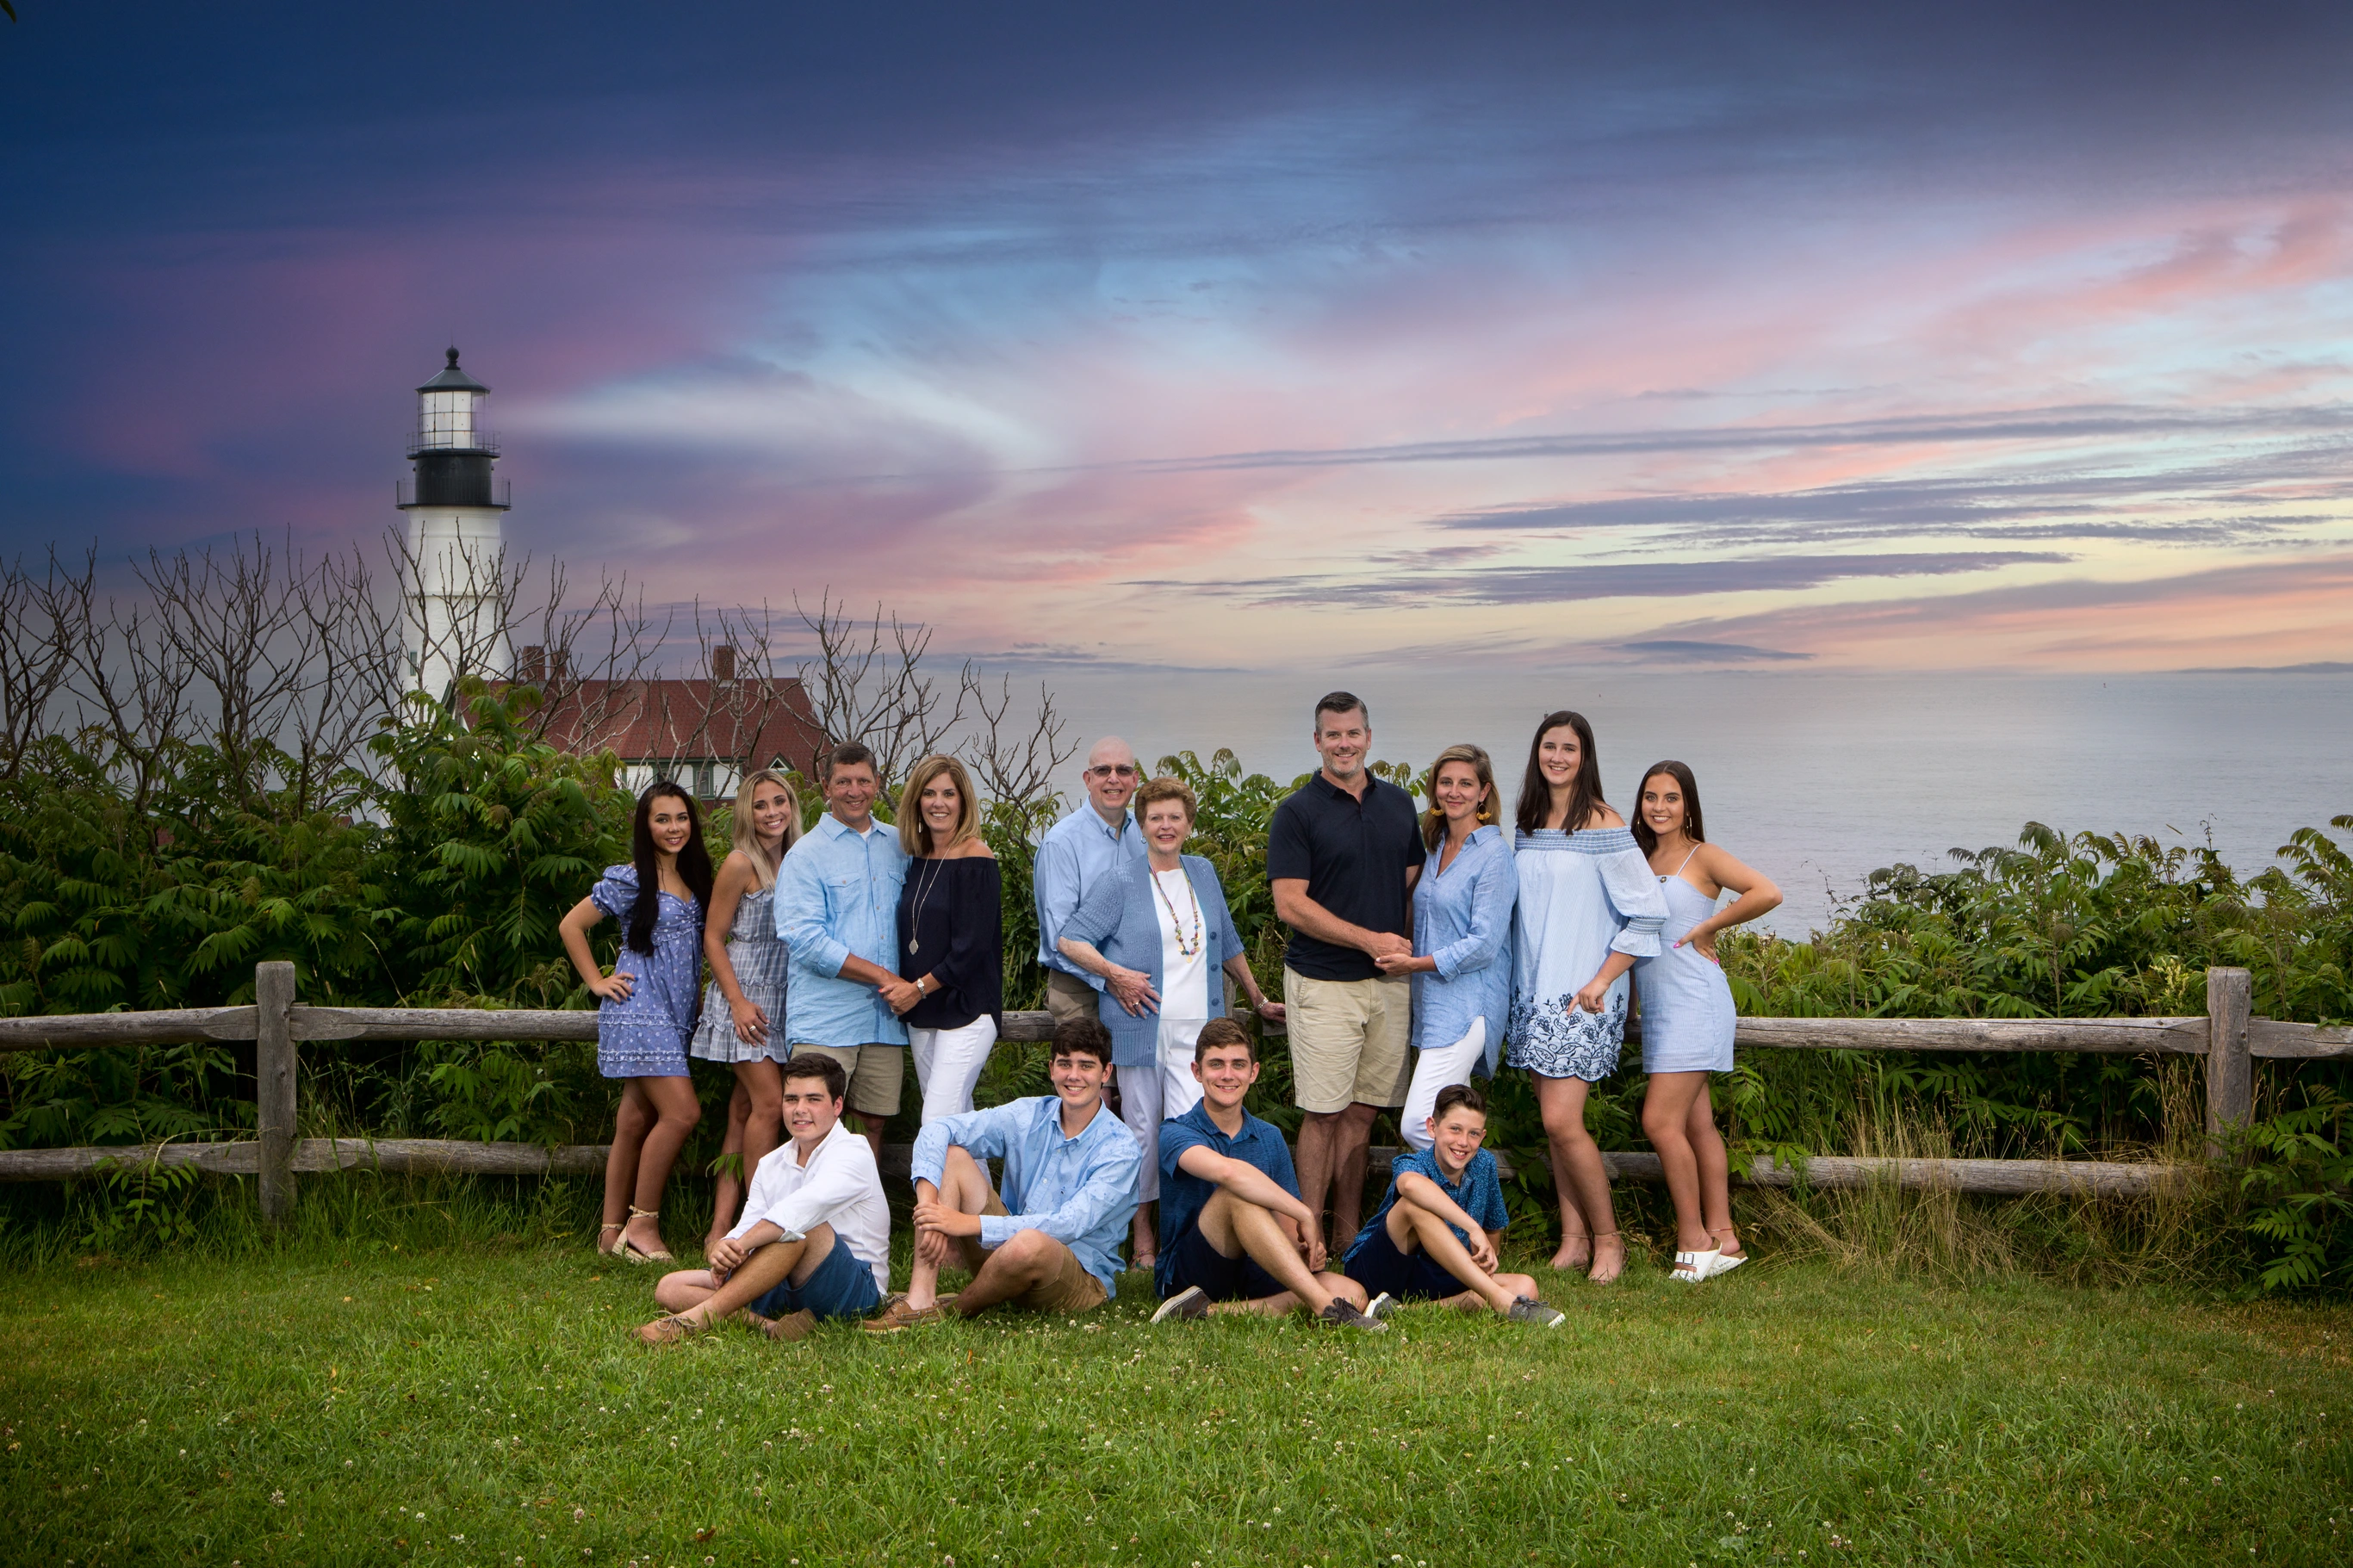 family portraits in photography studio or on location at beach or park